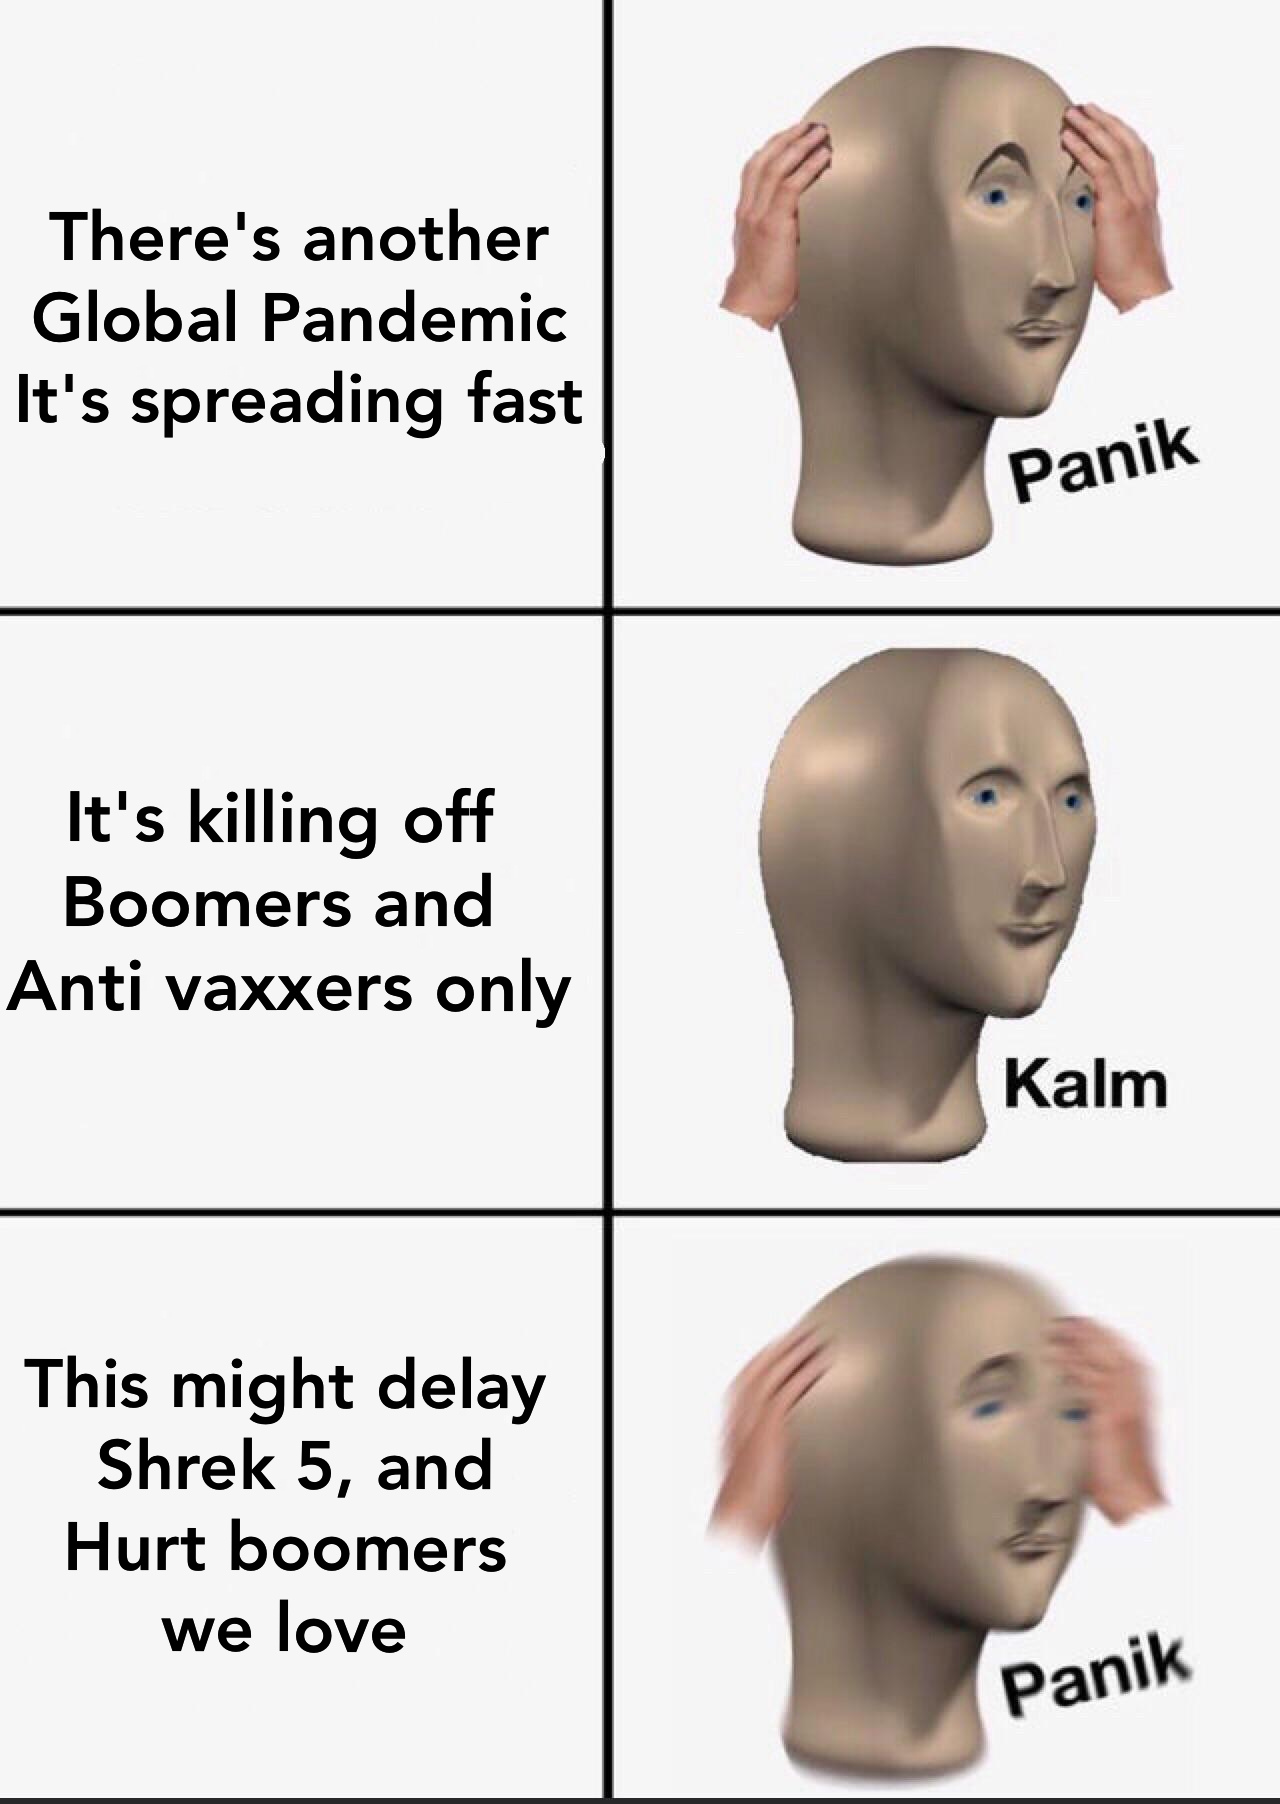 funny memes, 2020 sucks memes, coronavirus memes, friday 13th memes, toilet paper memes - Internet meme - There's another Global Pandemic It's spreading fast Panik It's killing off Boomers and Anti vaxxers only Kalm This might delay Shrek 5, and Hurt boom